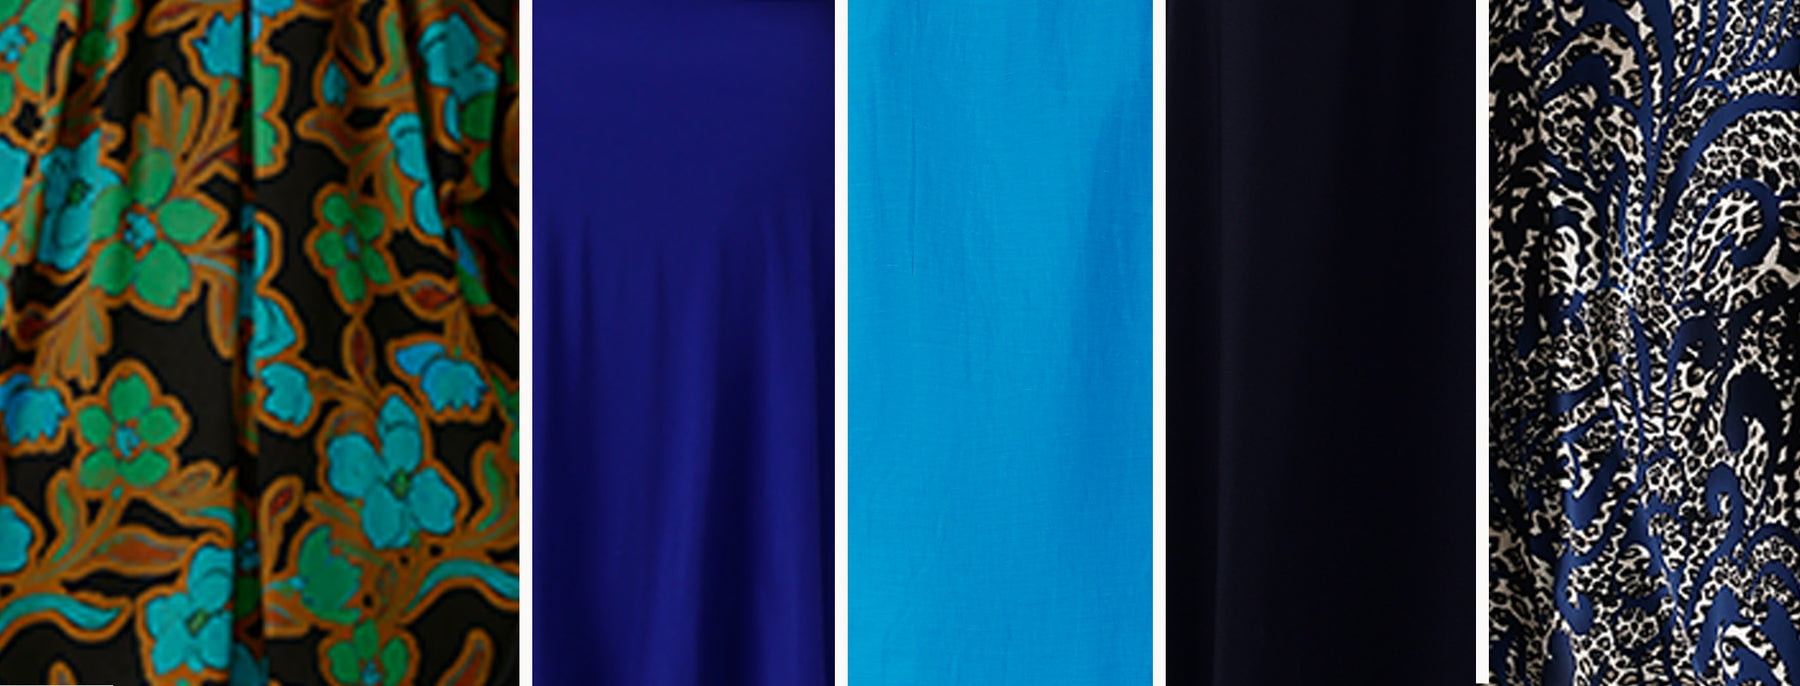 swatches of blue fabrics used by Australian women's clothing brand Leina & Fleur to make lightweight, breathable dresses, skirts, tops and jackets for women.